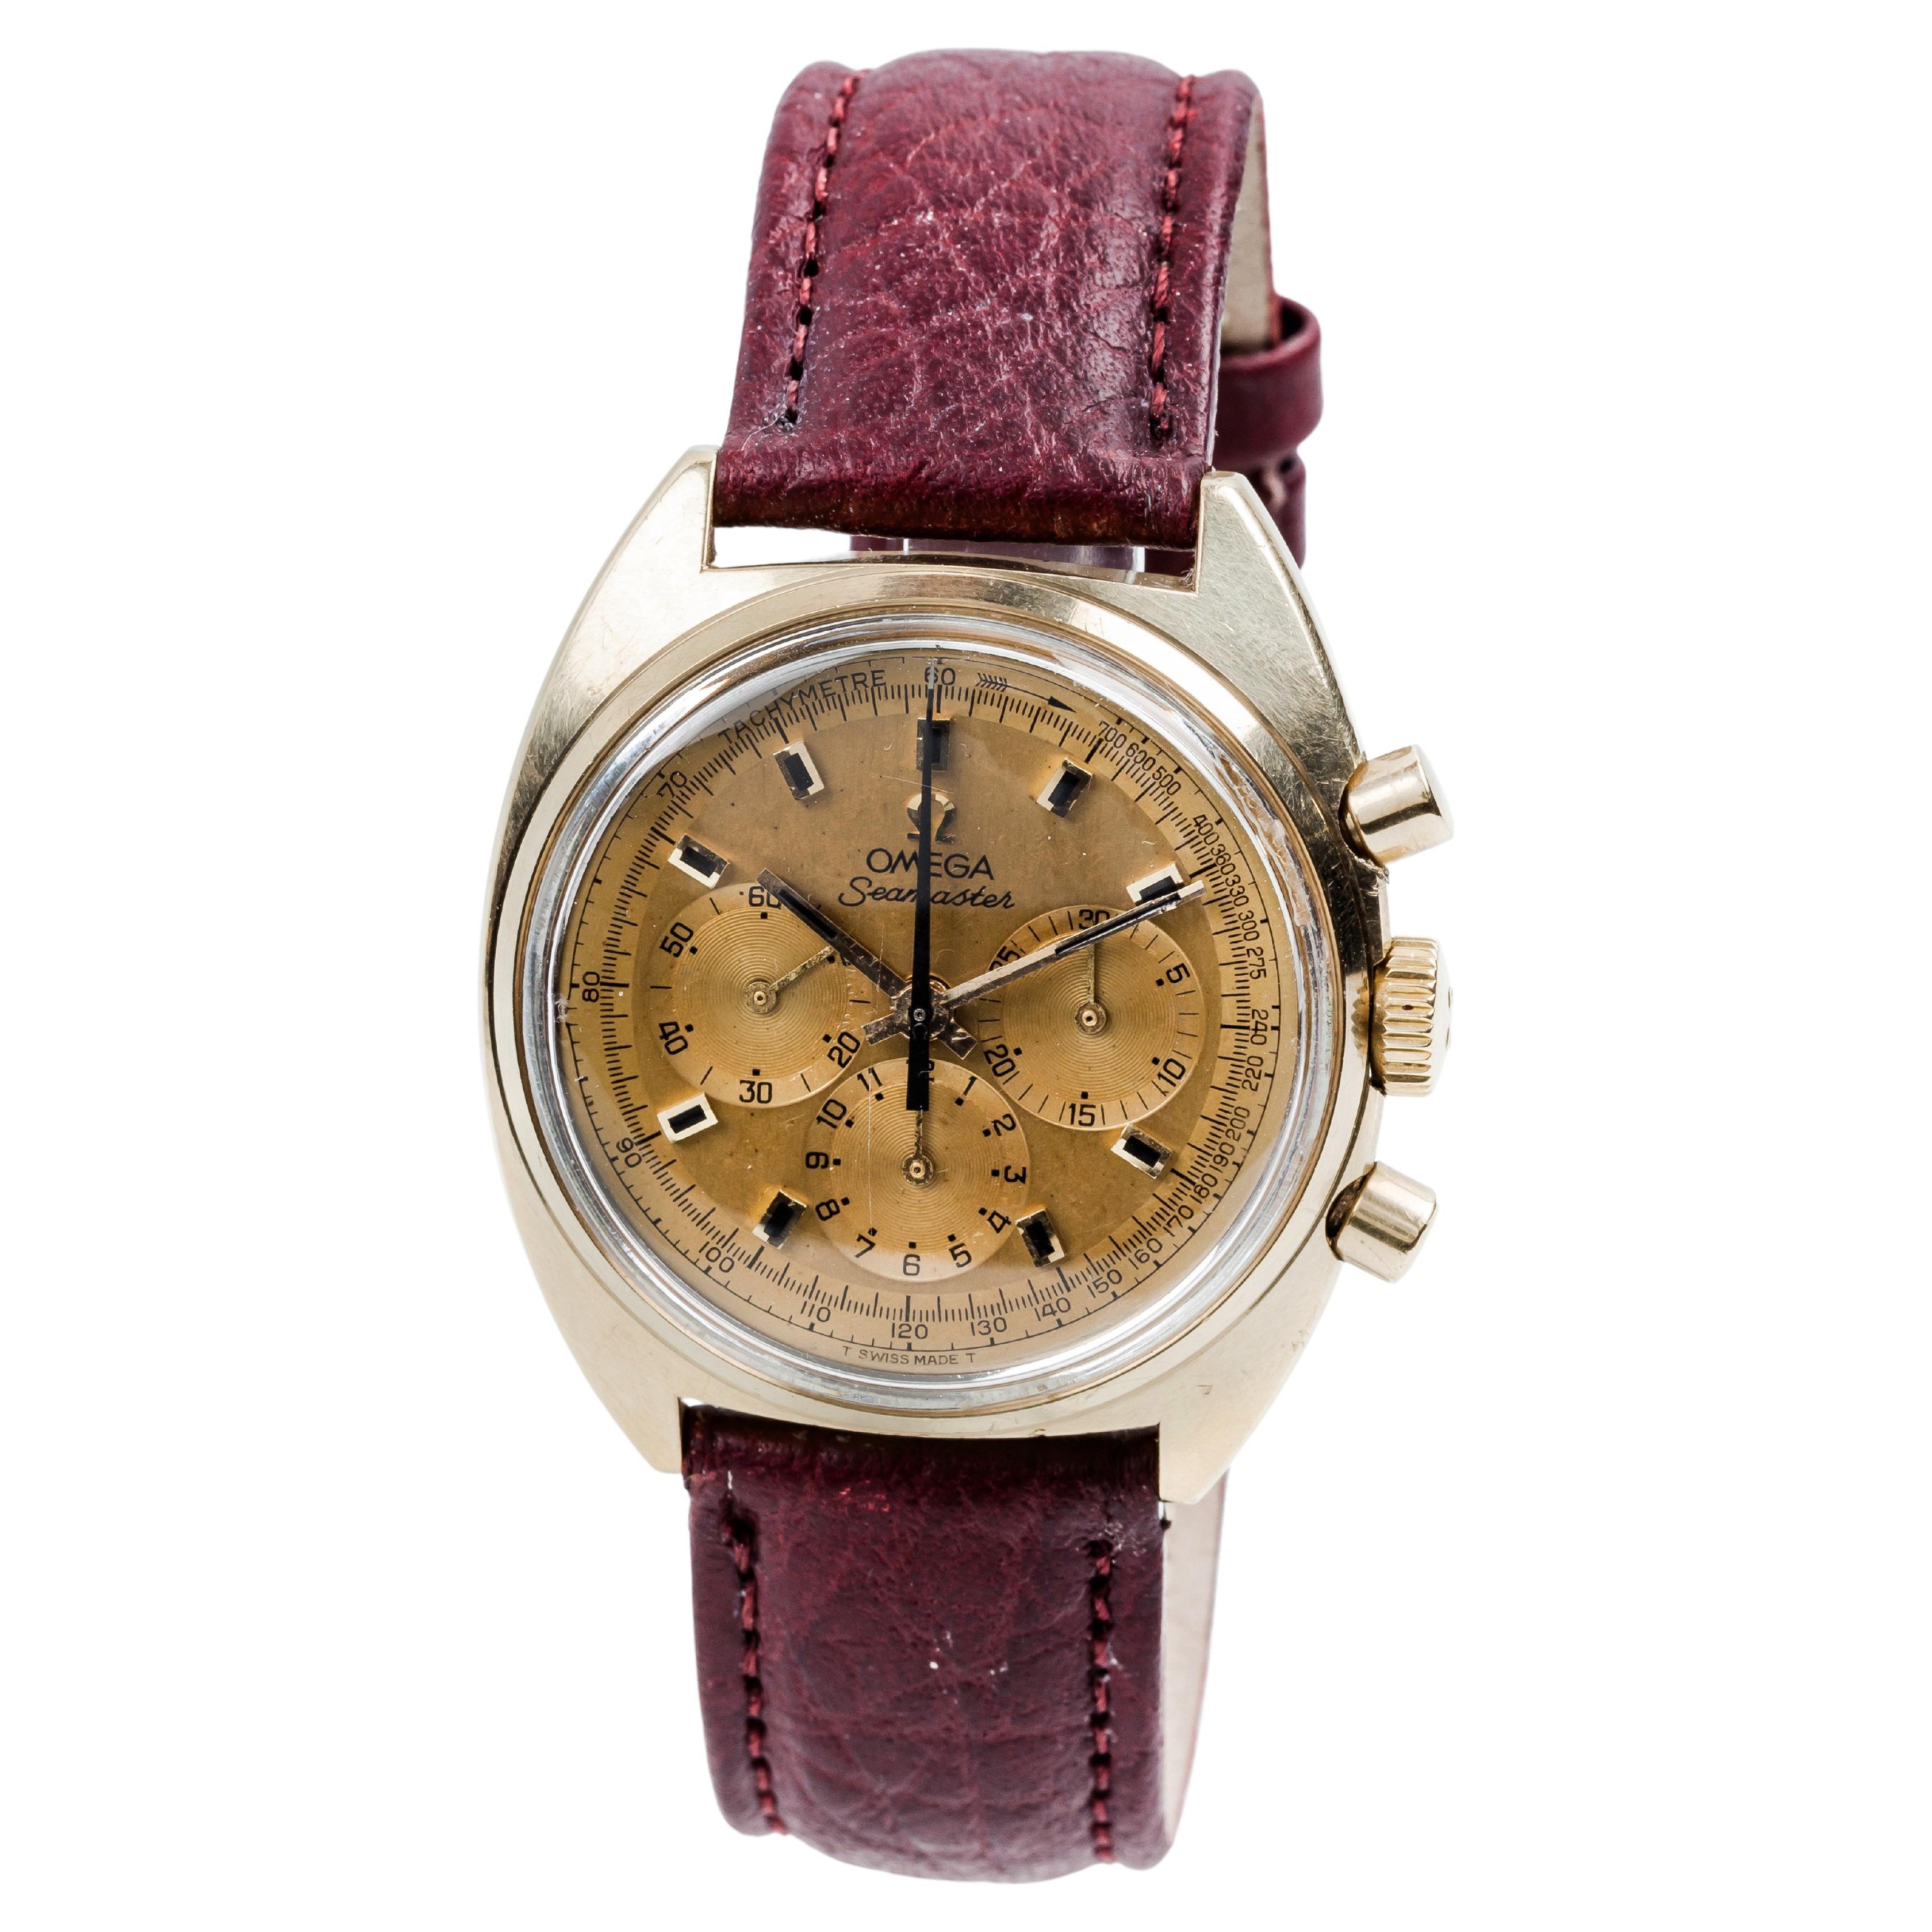 1968 Omega Saemaster Chronograph Yellow Gold 37mm leather strap with box. 
Mechanical manual wind
Case Number 27710112
17 rubies, all original condition weight 76gr 
leather strap new
Condition : Très bon état
Garantie : Révisée, Garantie 1